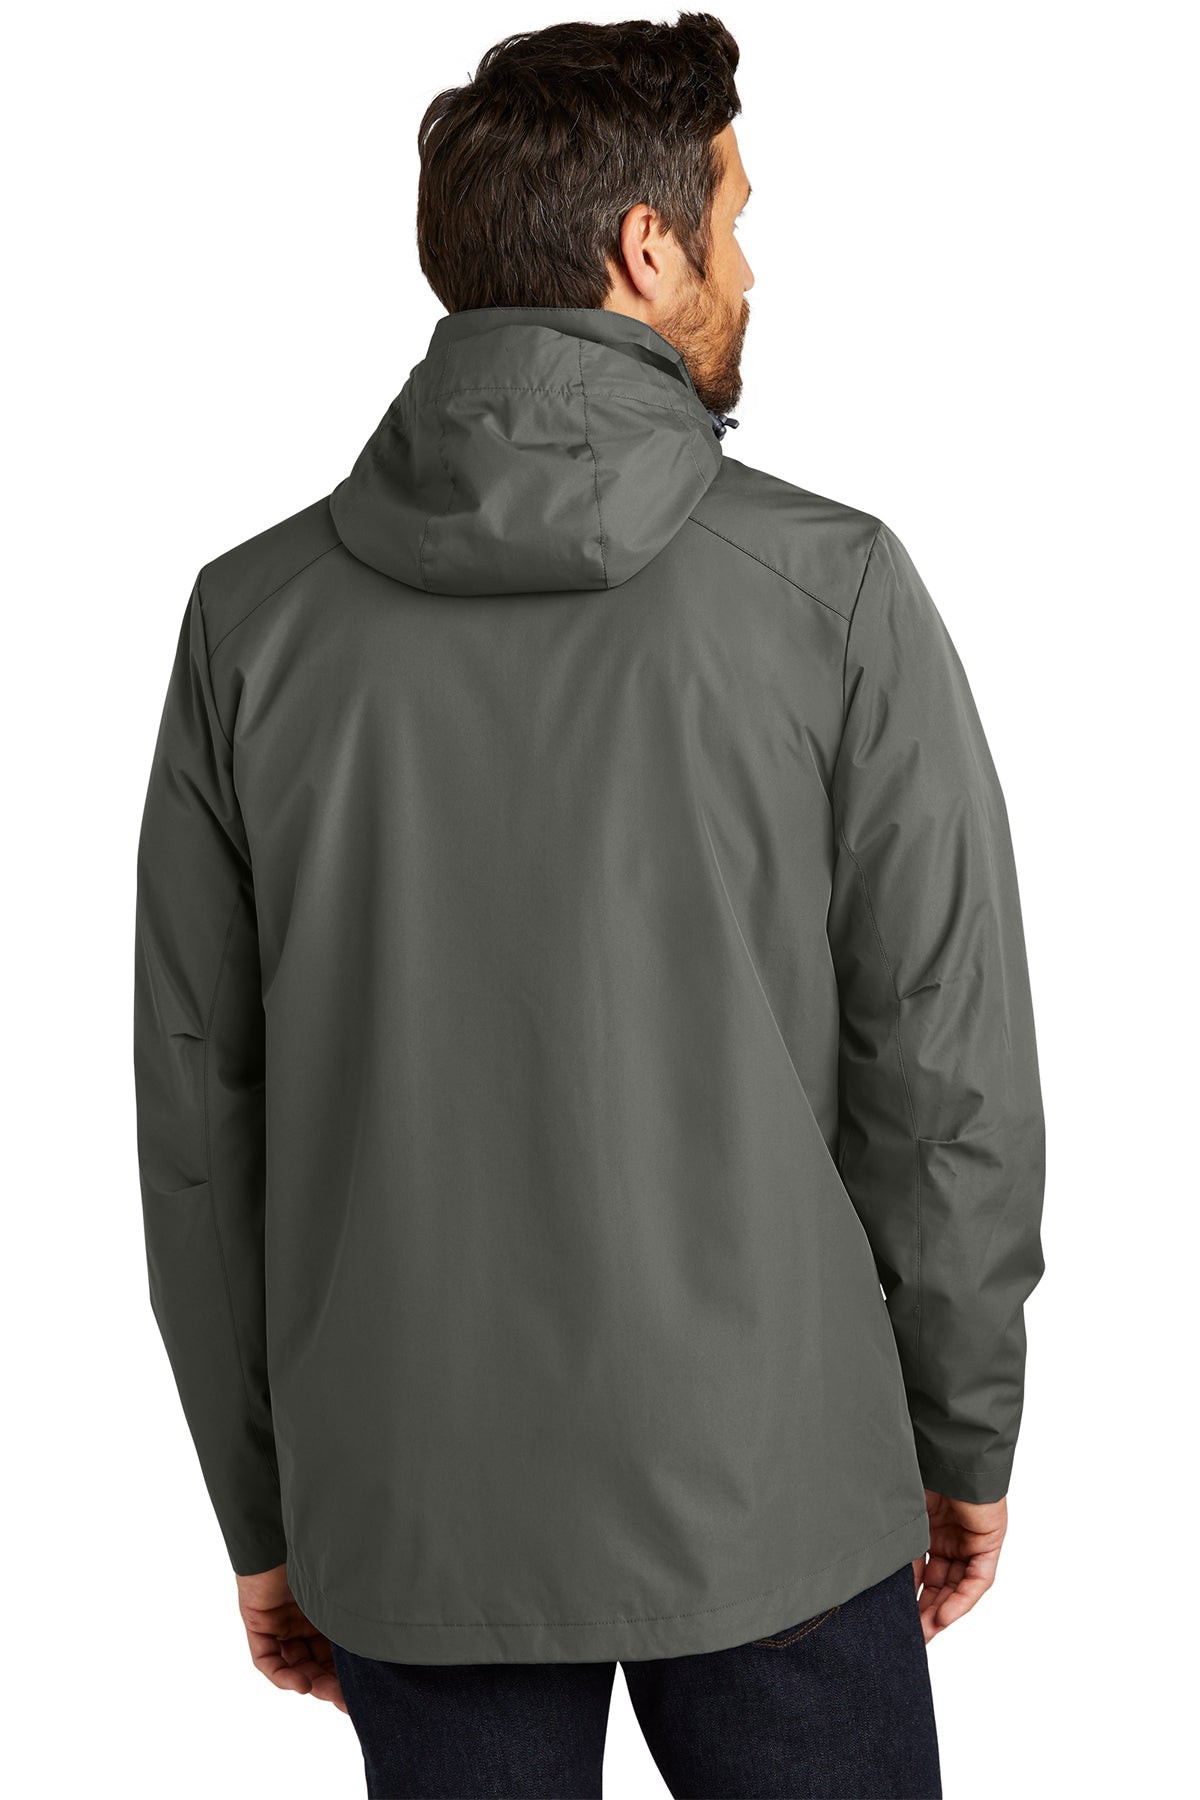 Port Authority All-Weather 3-in-1 Customized Jackets, Storm Grey